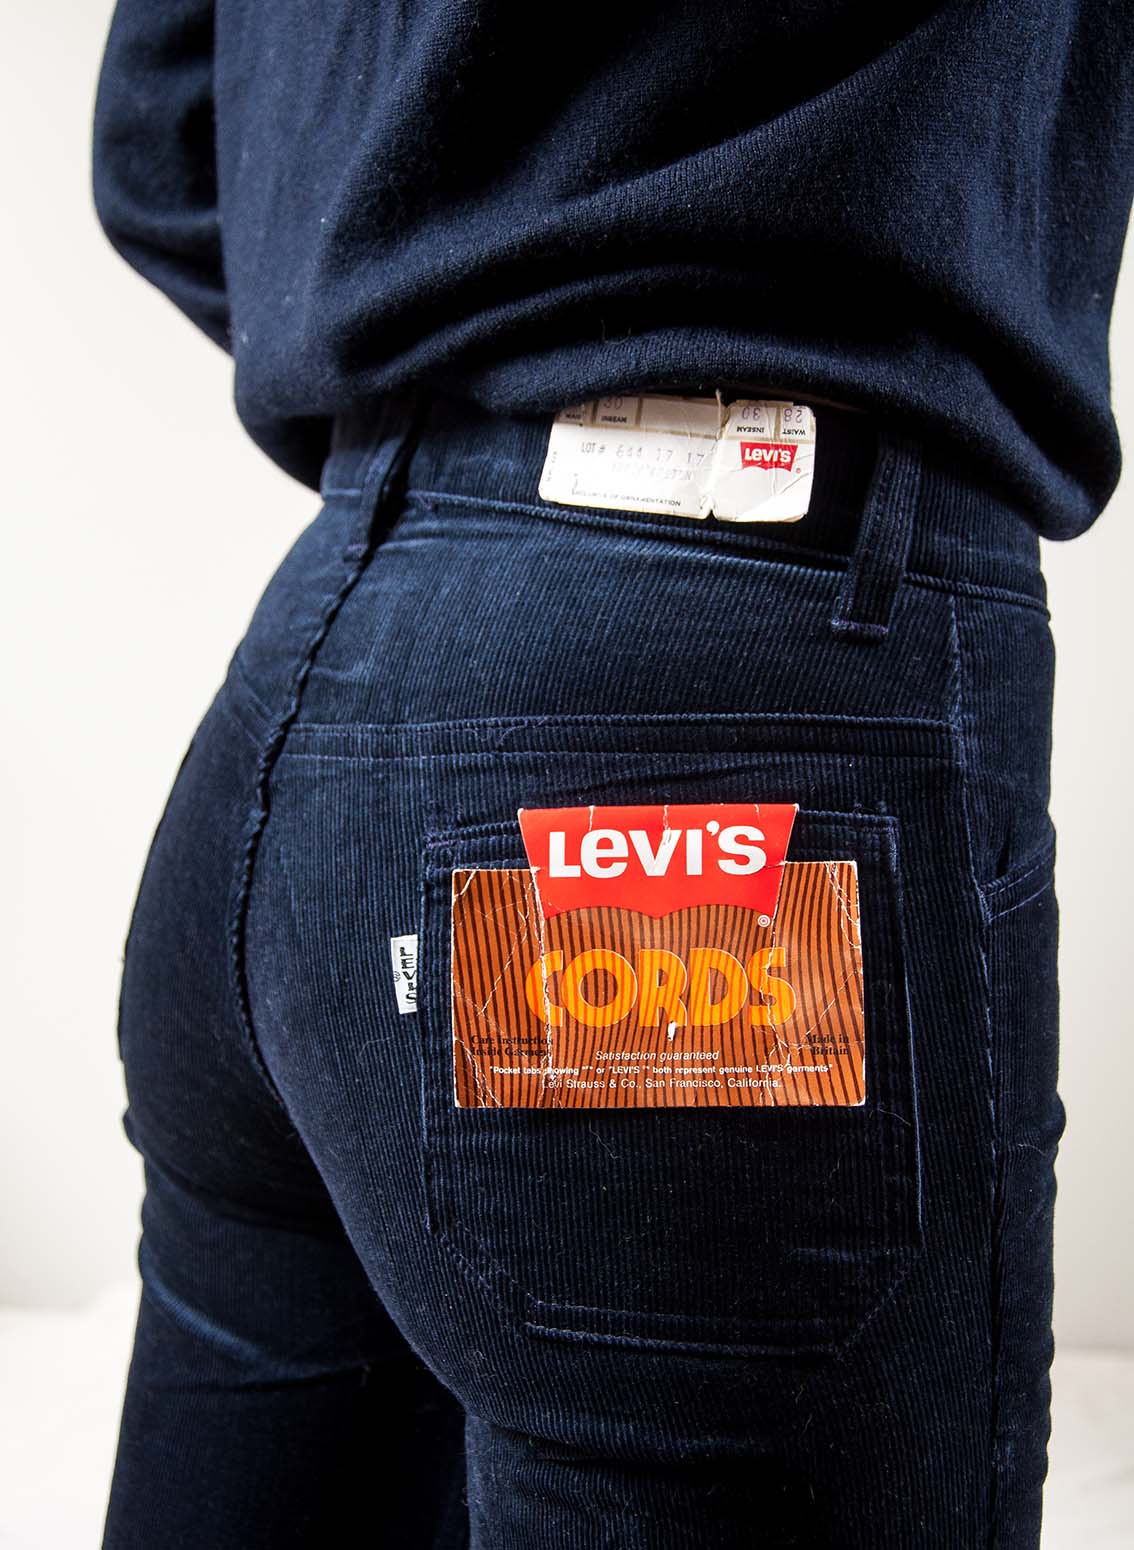 The dead stock corduroy Levis – Size 25 inch – ANDPAUSE